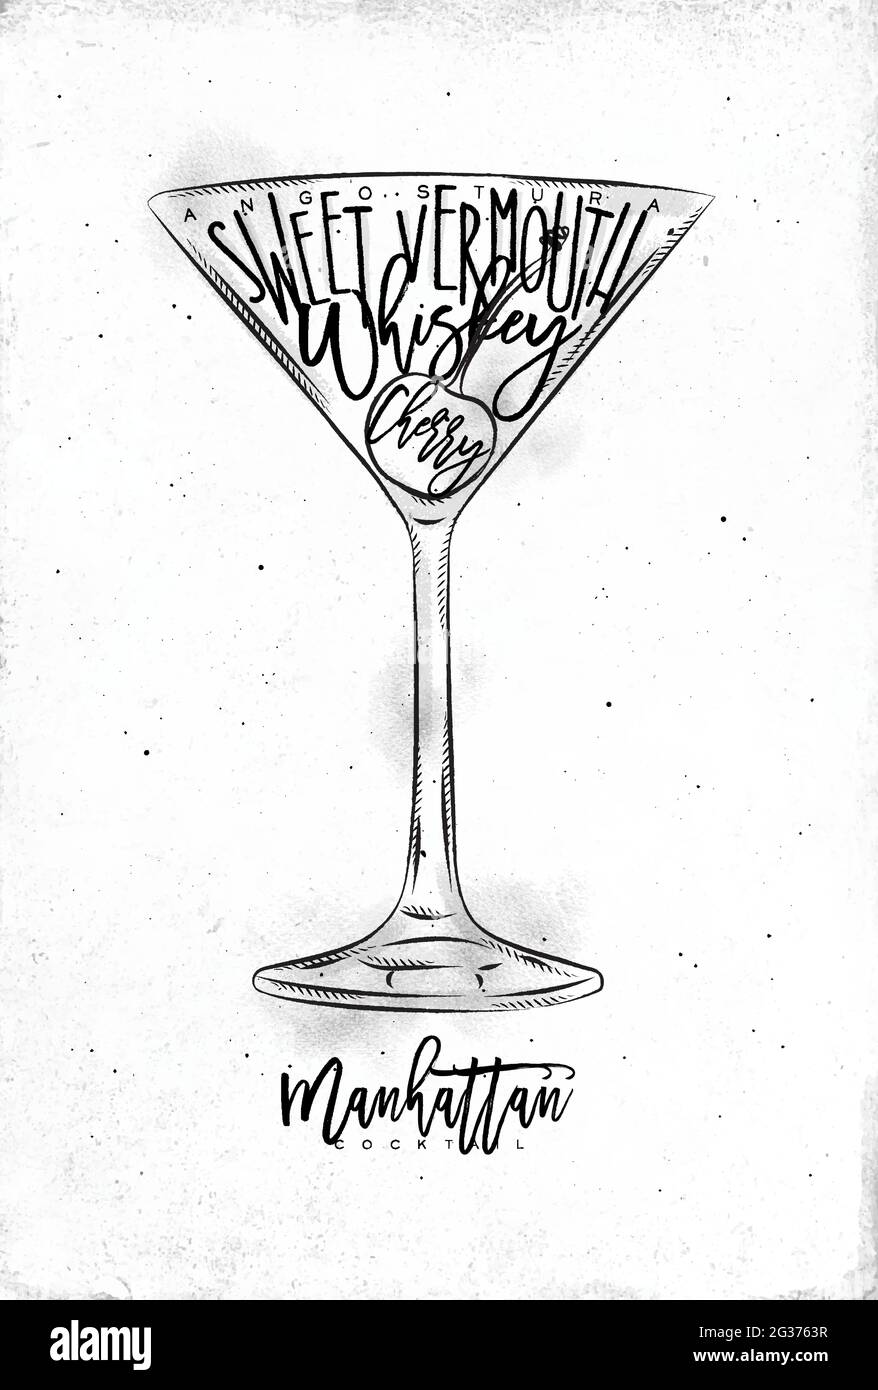 Manhattan cocktail lettering angostura, sweet vermouth, whiskey, cherry in vintage graphic style drawing on dirty paper background Stock Vector